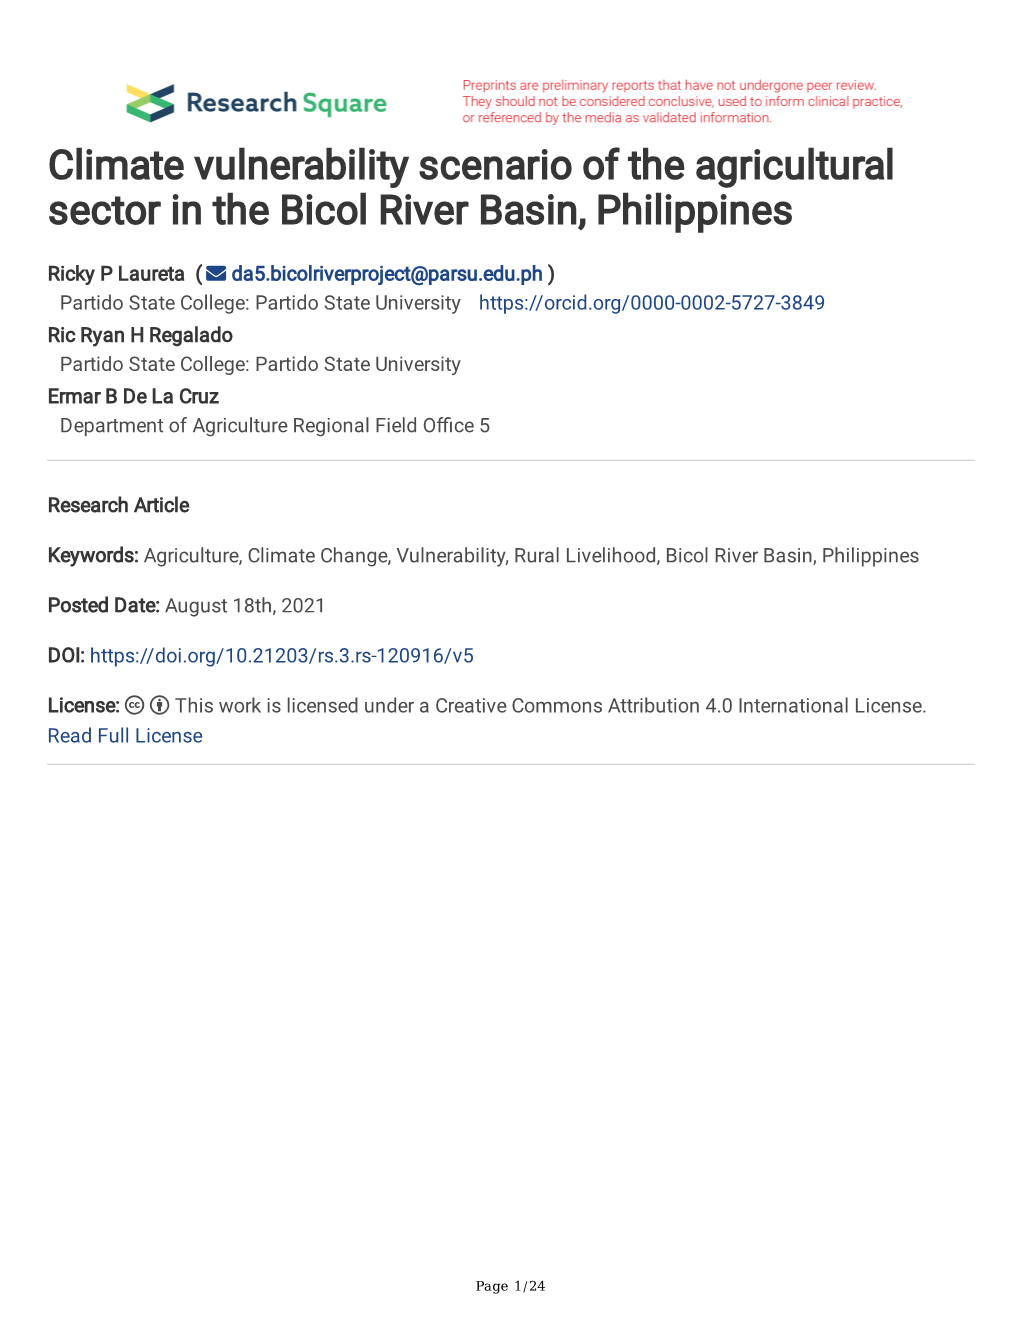 Climate Vulnerability Scenario of the Agricultural Sector in the Bicol River Basin, Philippines